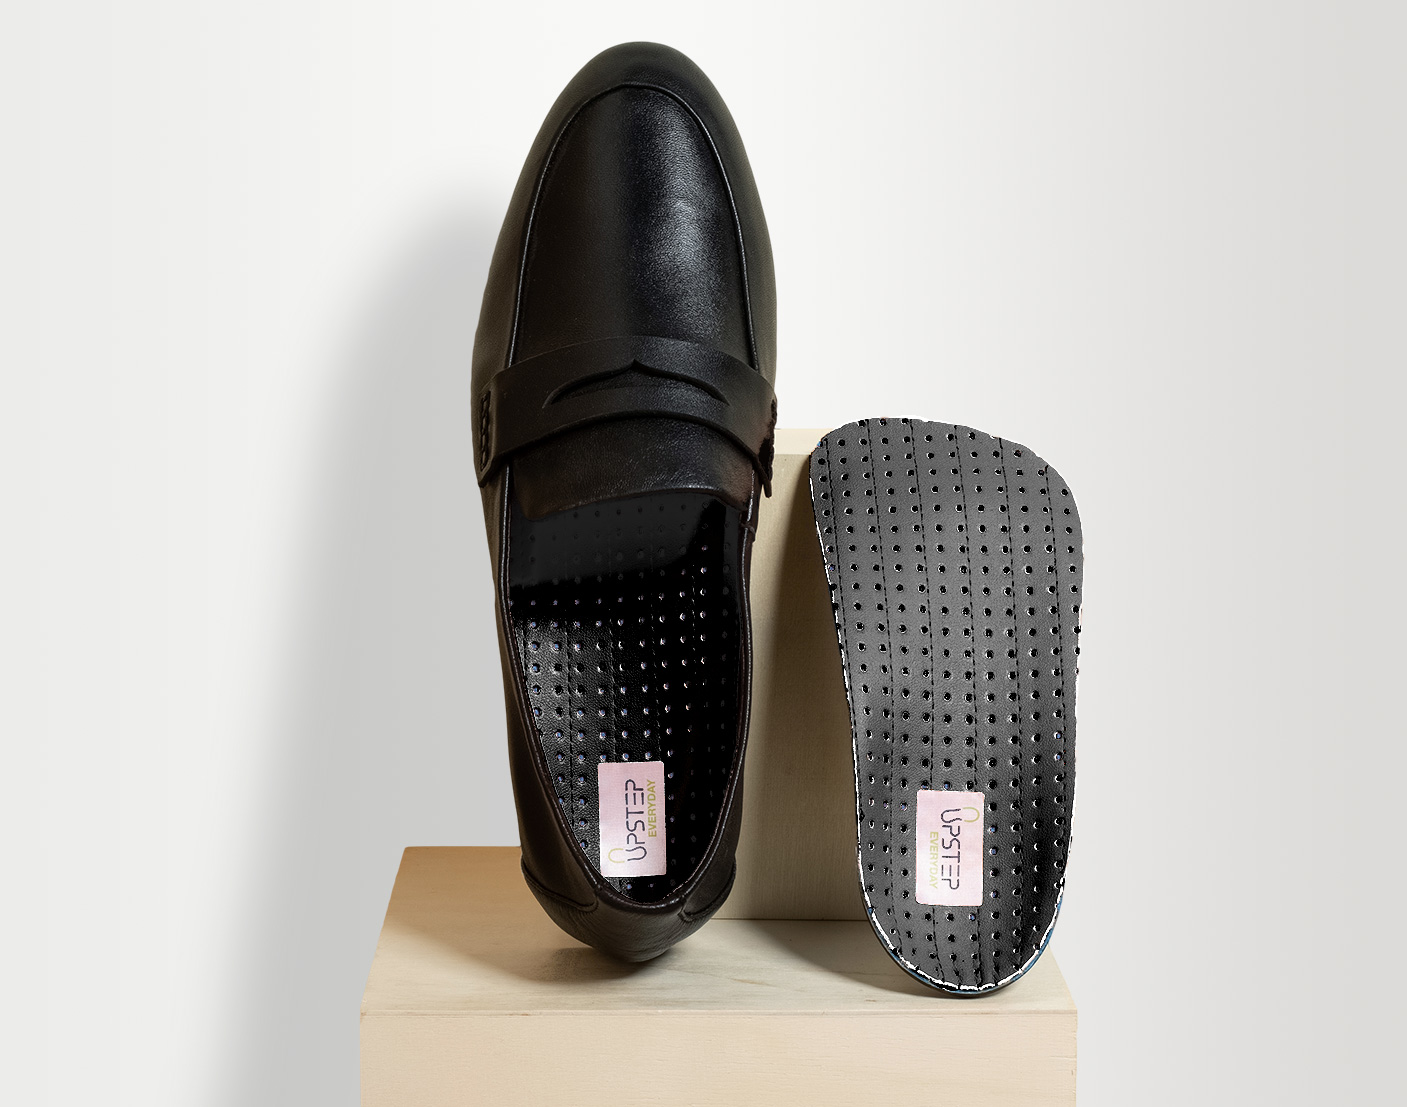 Black insole next to a black formal shoe